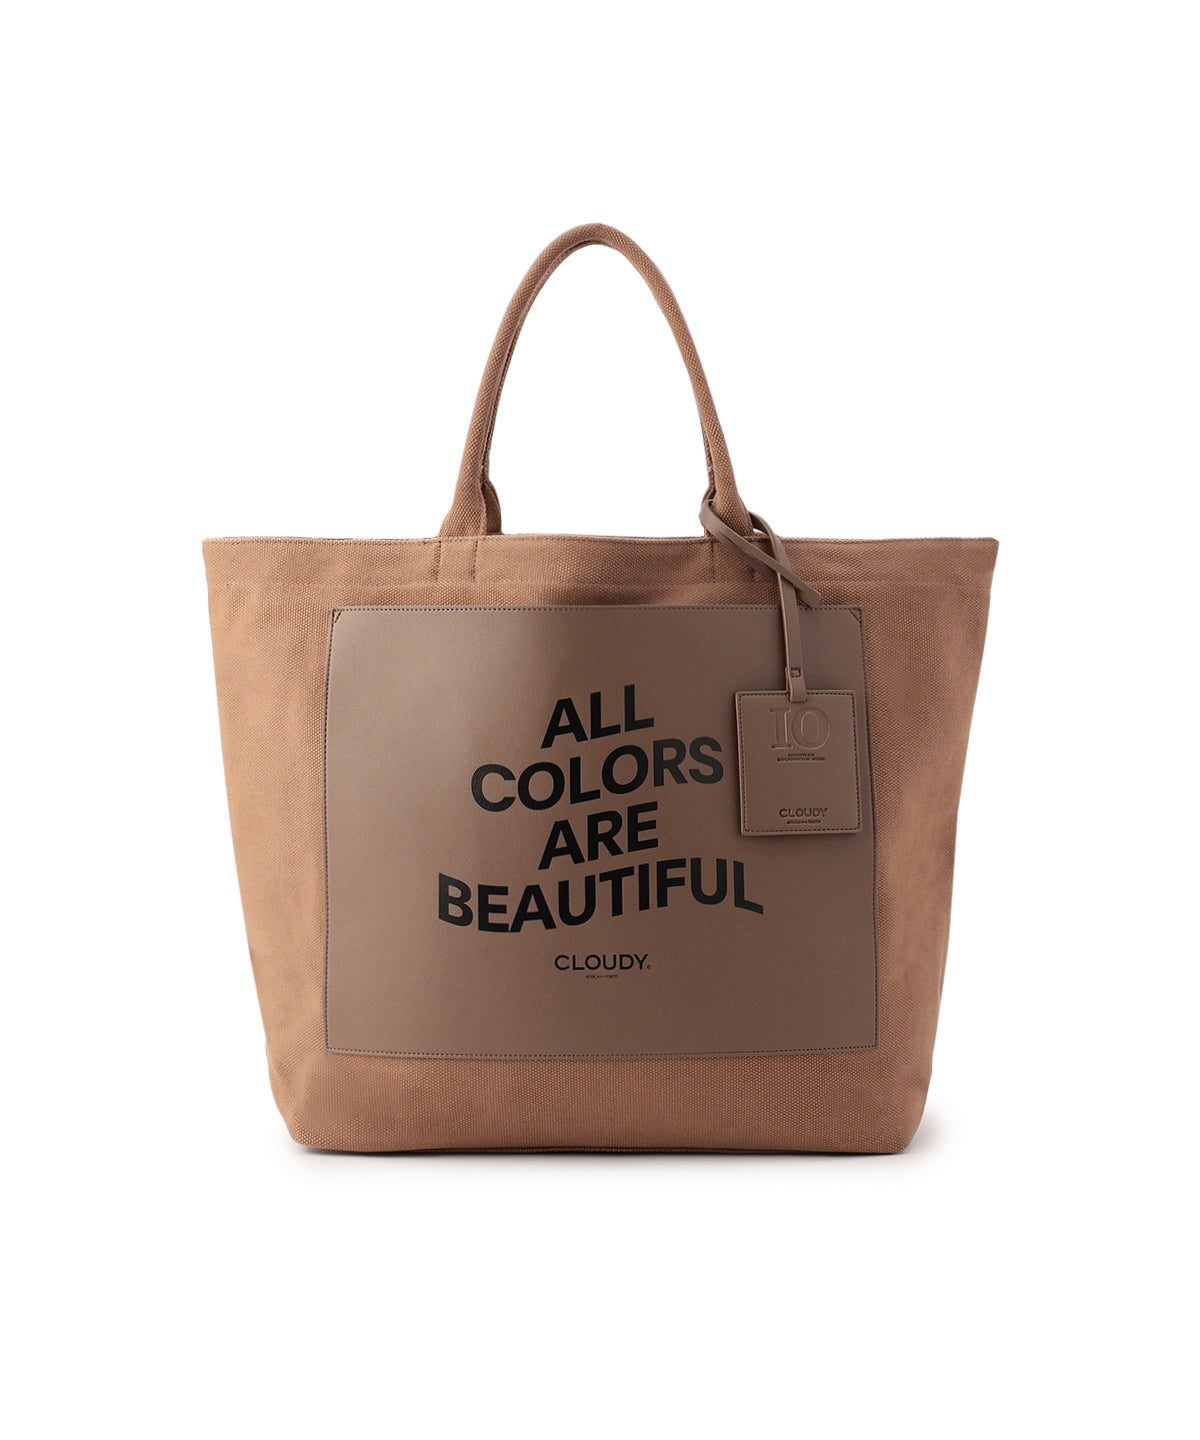 Colored Canvas Tote (Large) BROWN | バッグ | CLOUDY公式通販サイト